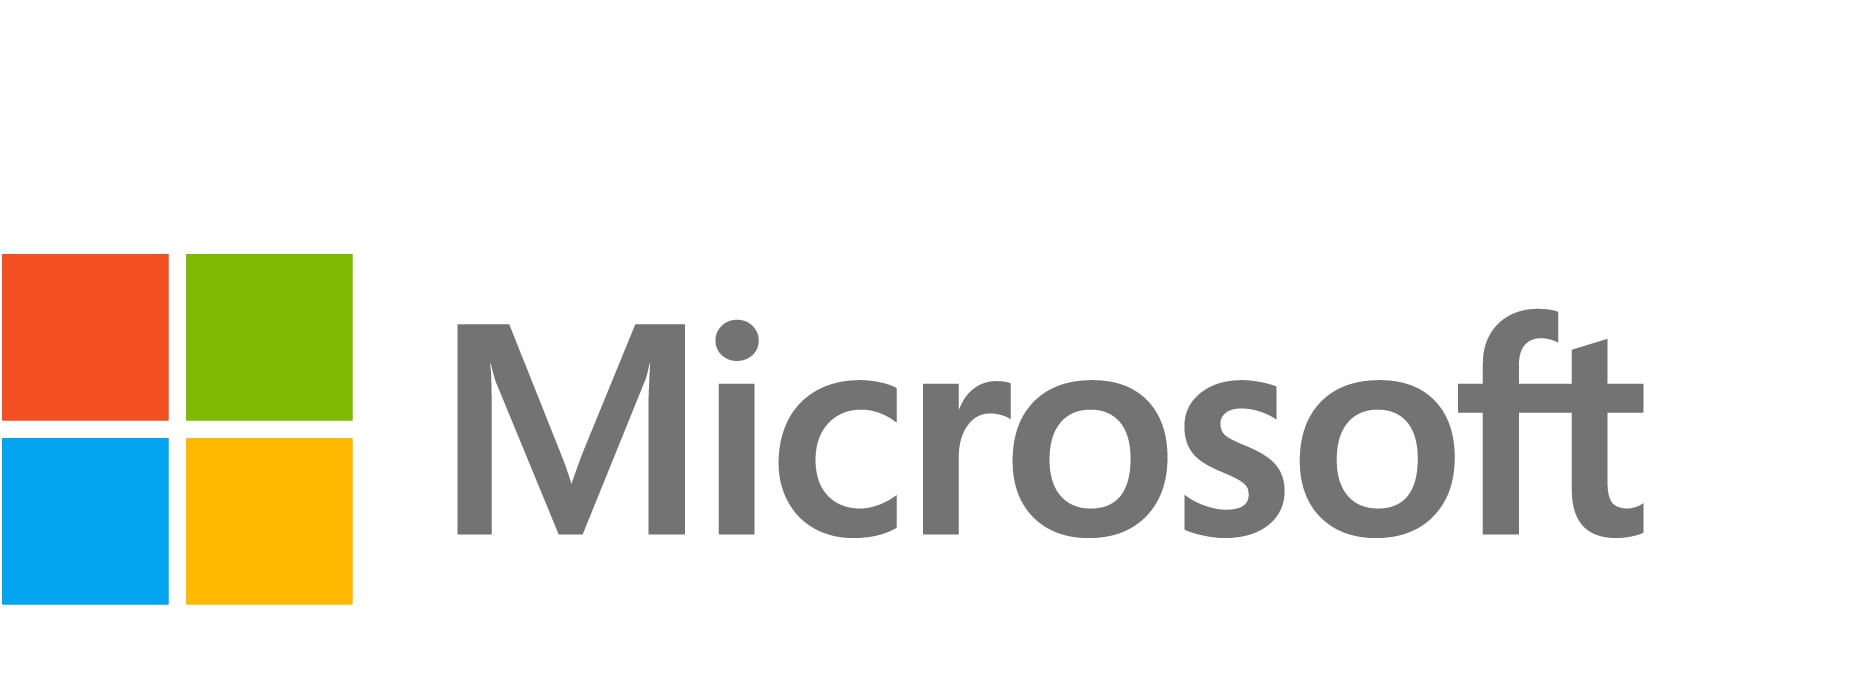 Microsoft Extended Hardware Service Plan - extended service agreement - 3 years